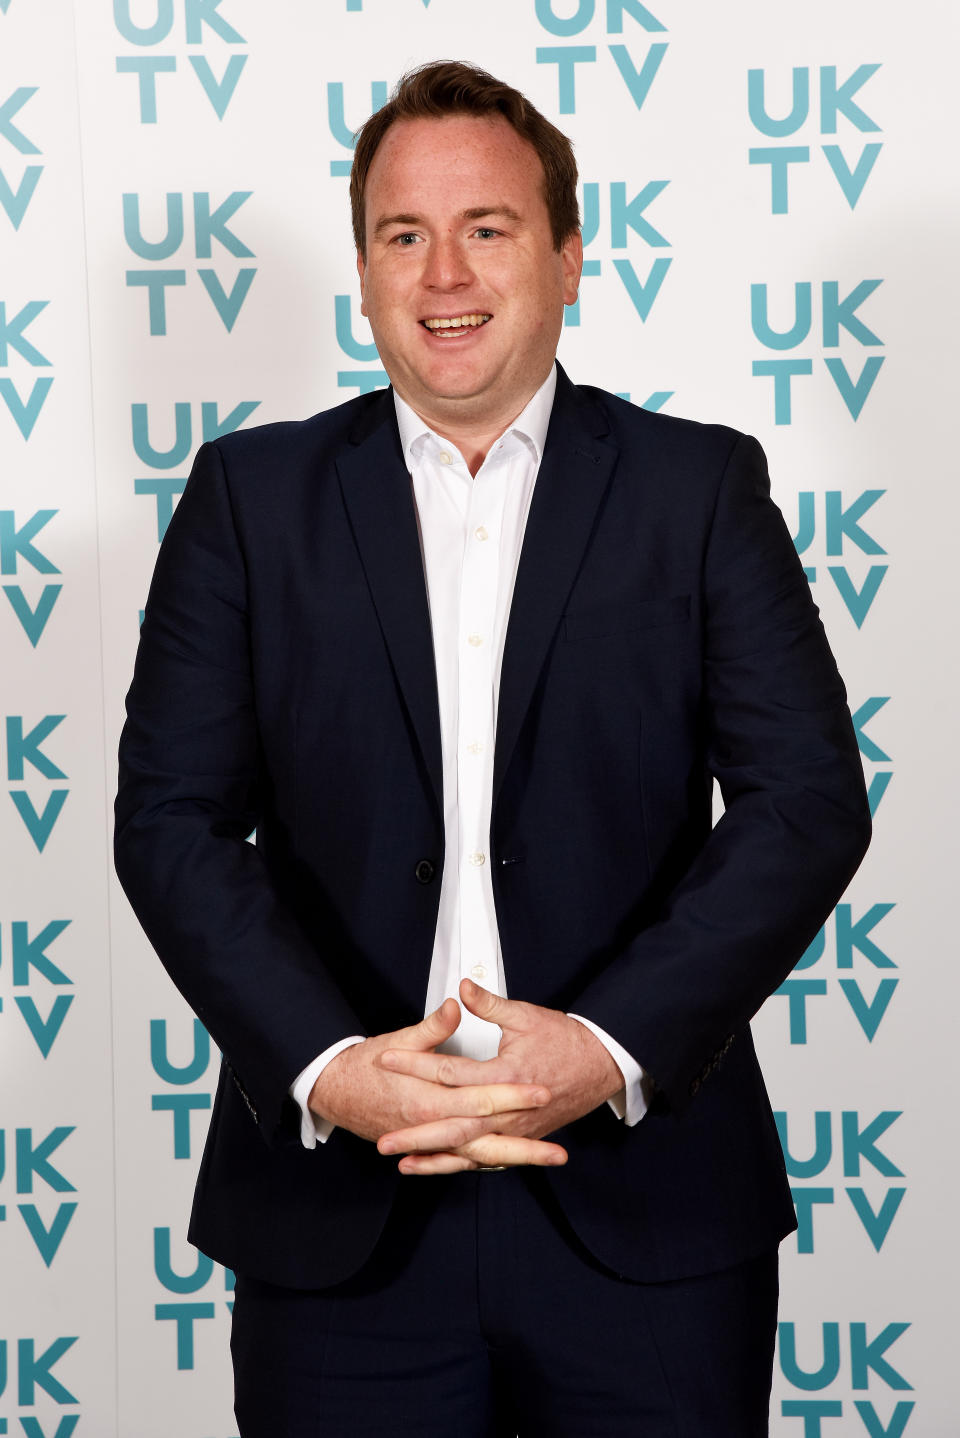 Comedian Matt Forde is best known for voicing Boris Johnson and Donald Trump in the political satire 'Spitting Image.' (Getty Images)